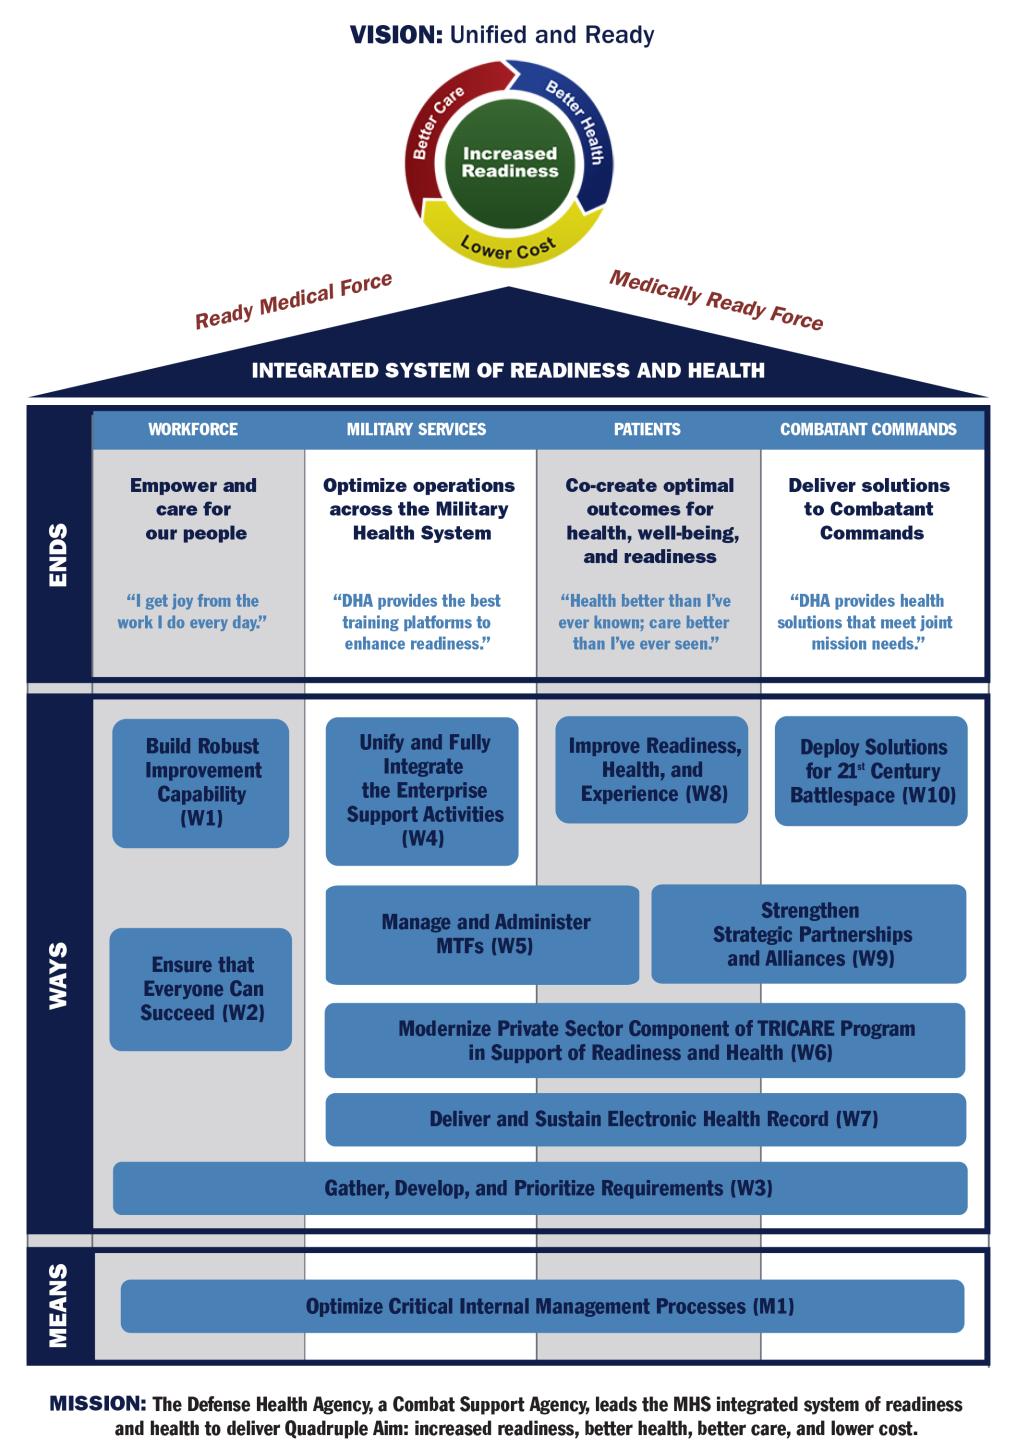 The Defense Health Agency s Strategy Map The DHA s Strategy Map 2.